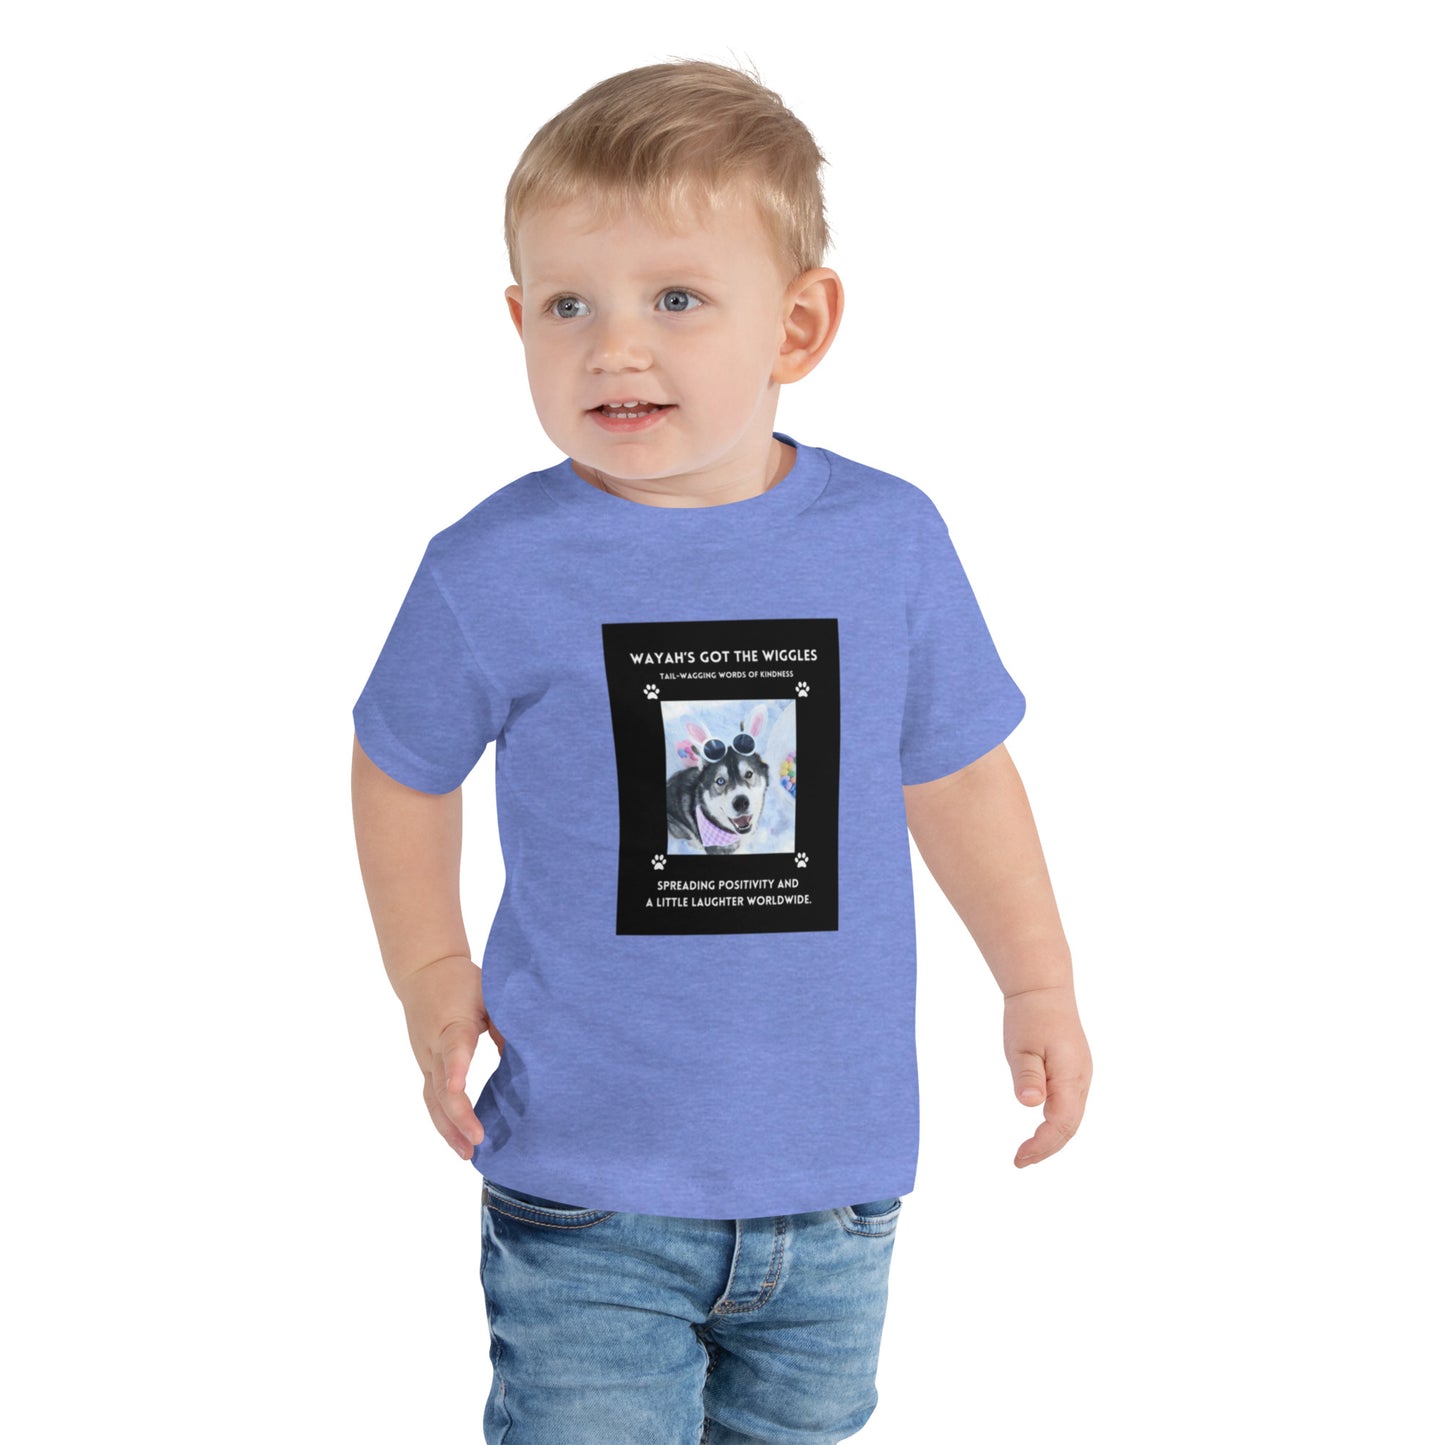 Toddler Short Sleeve Tee- Wayah's Got the Wiggles Collection